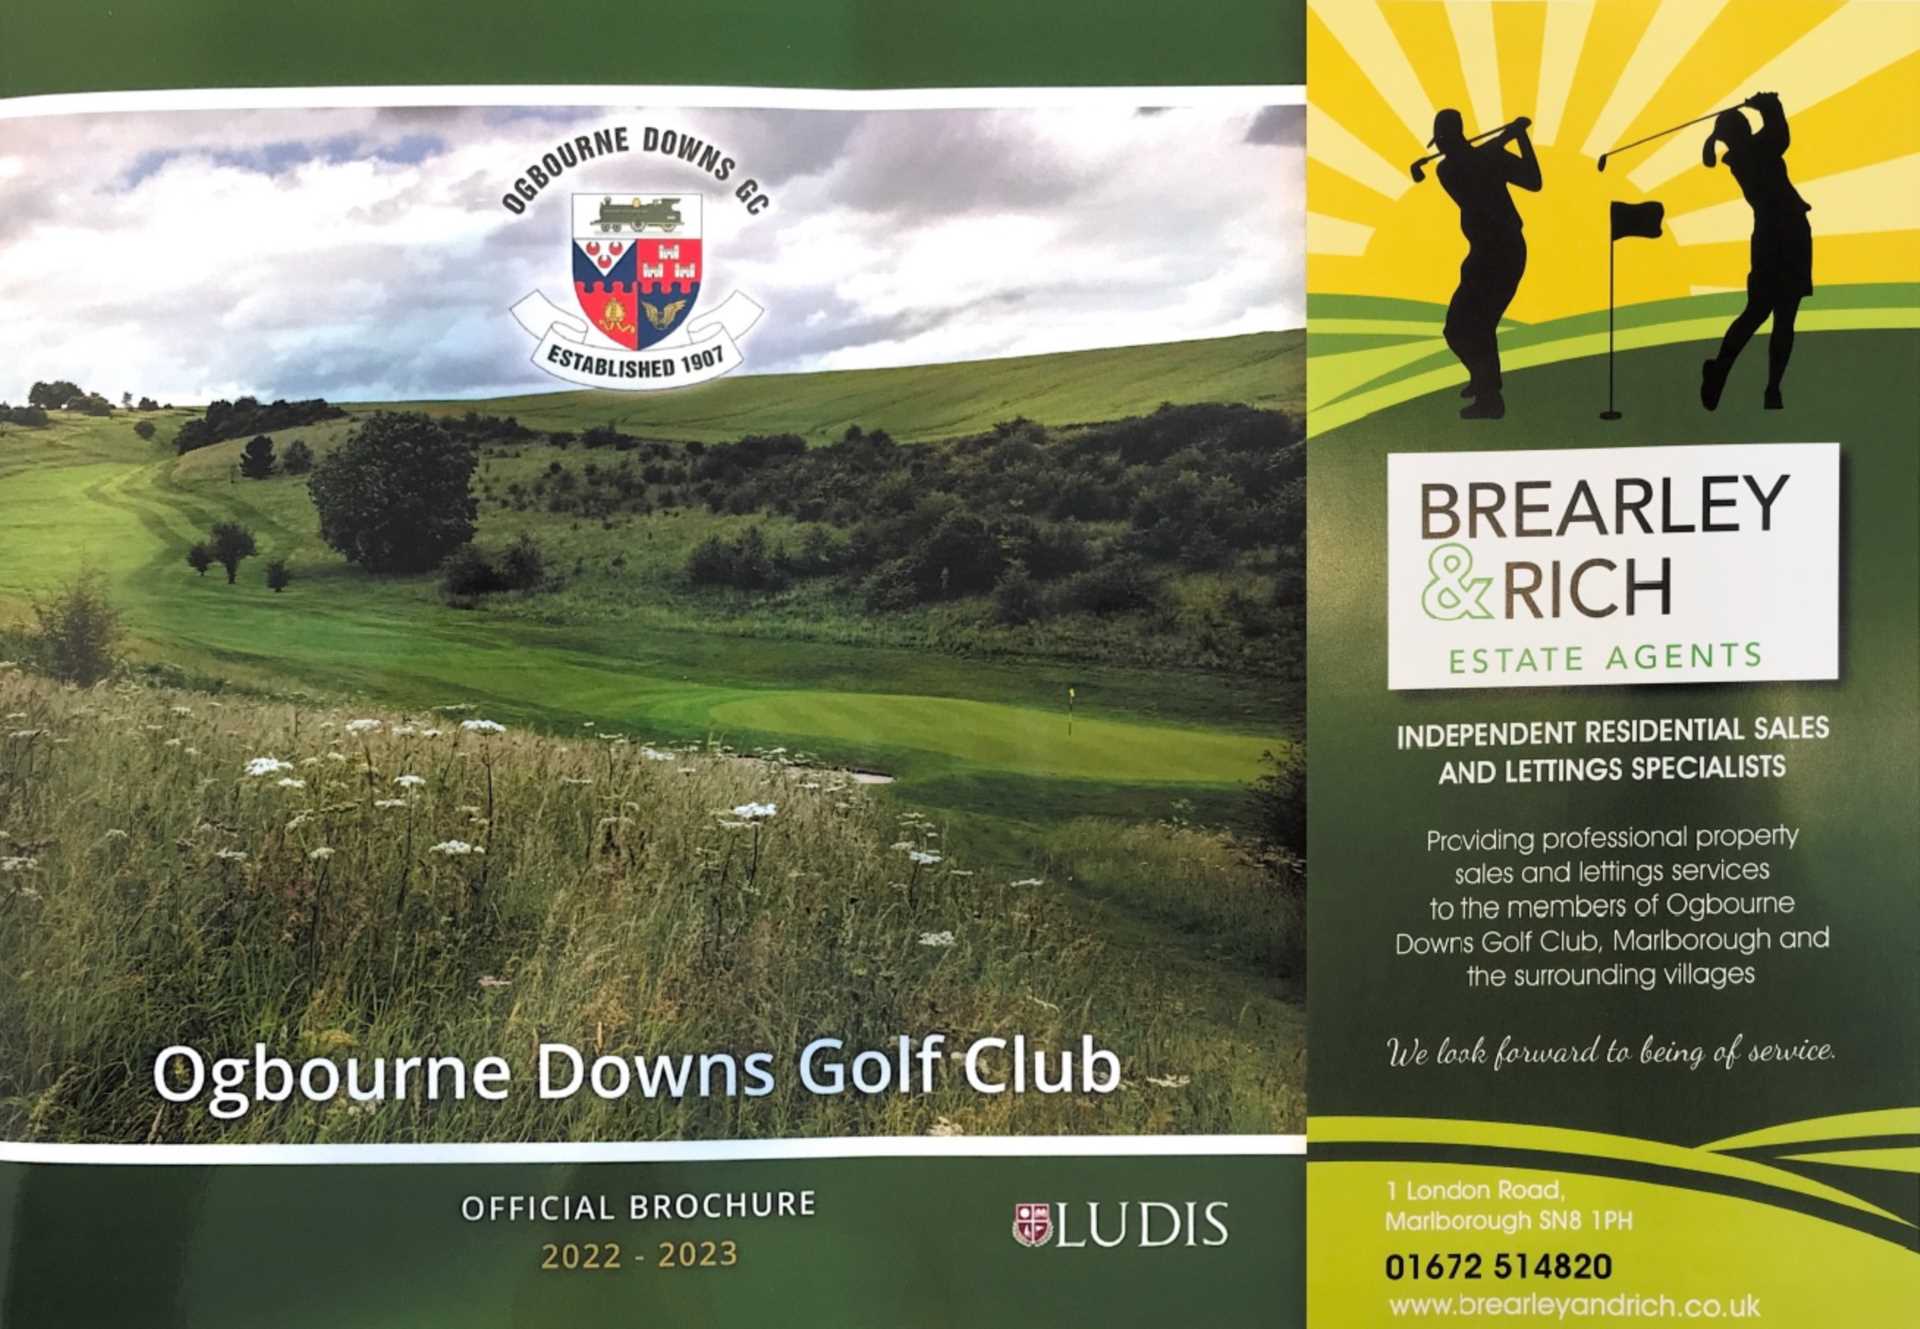 Proud to be supporting Ogbourne Downs Golf Club in 2022.